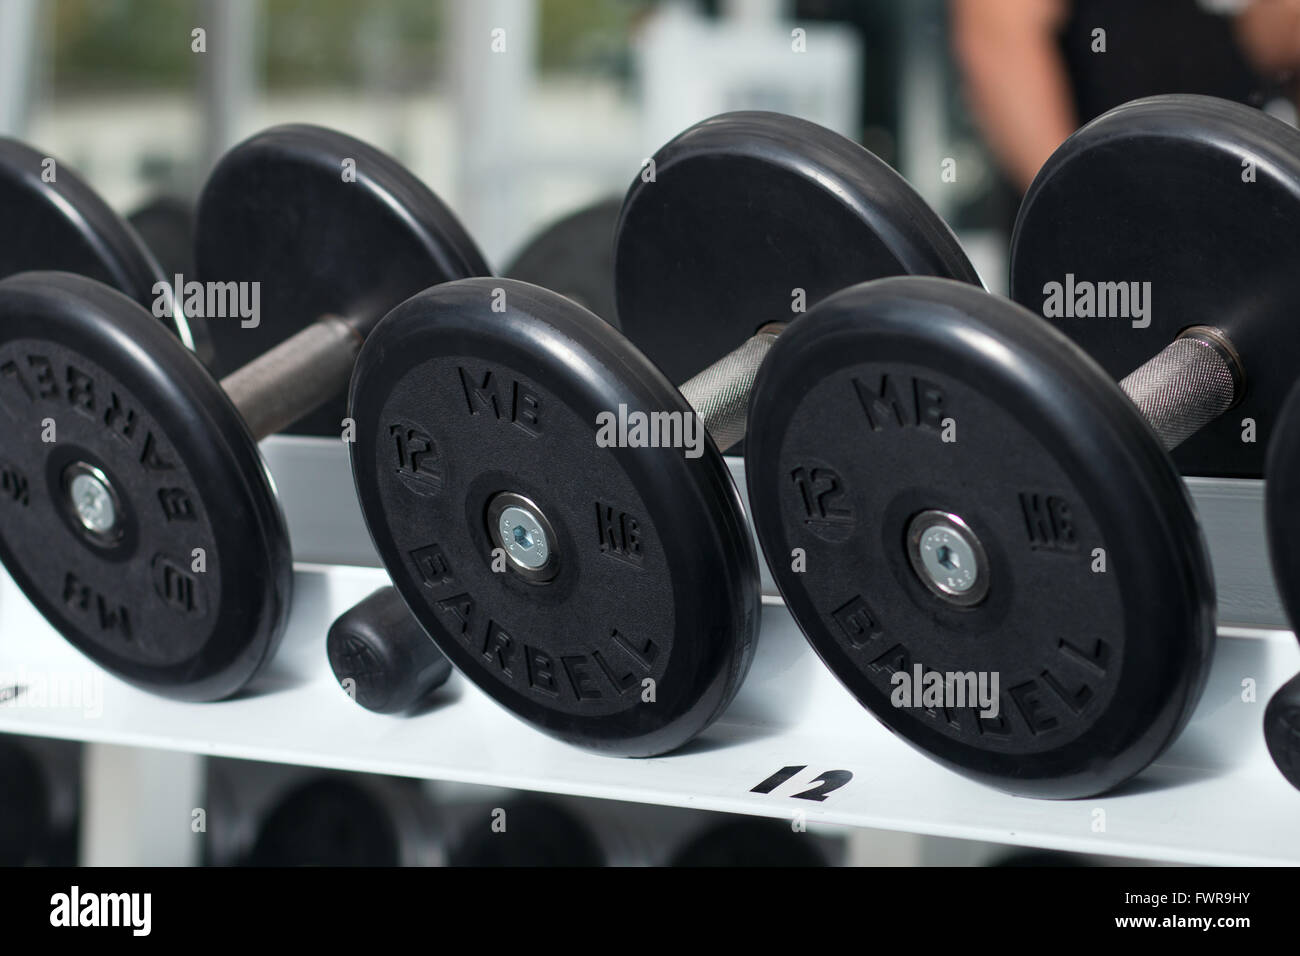 Close-up view of barbells organized in row on rack at gym Stock Photo